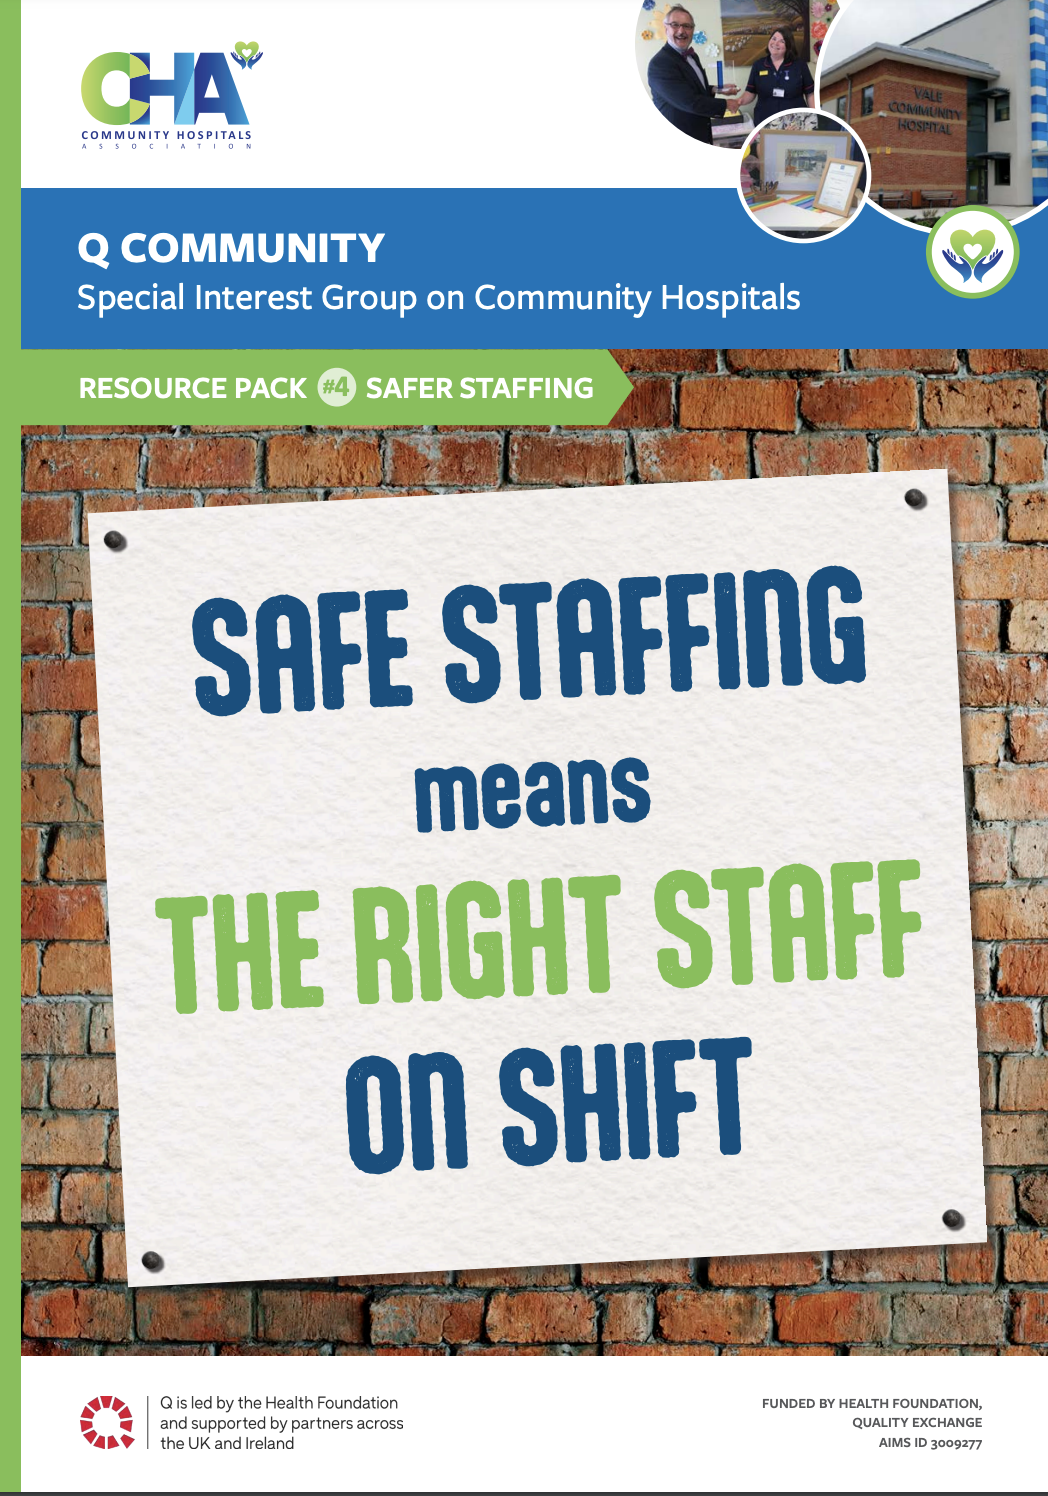 Community Hospital Resource Packs -#4 Safer Staffing featured image